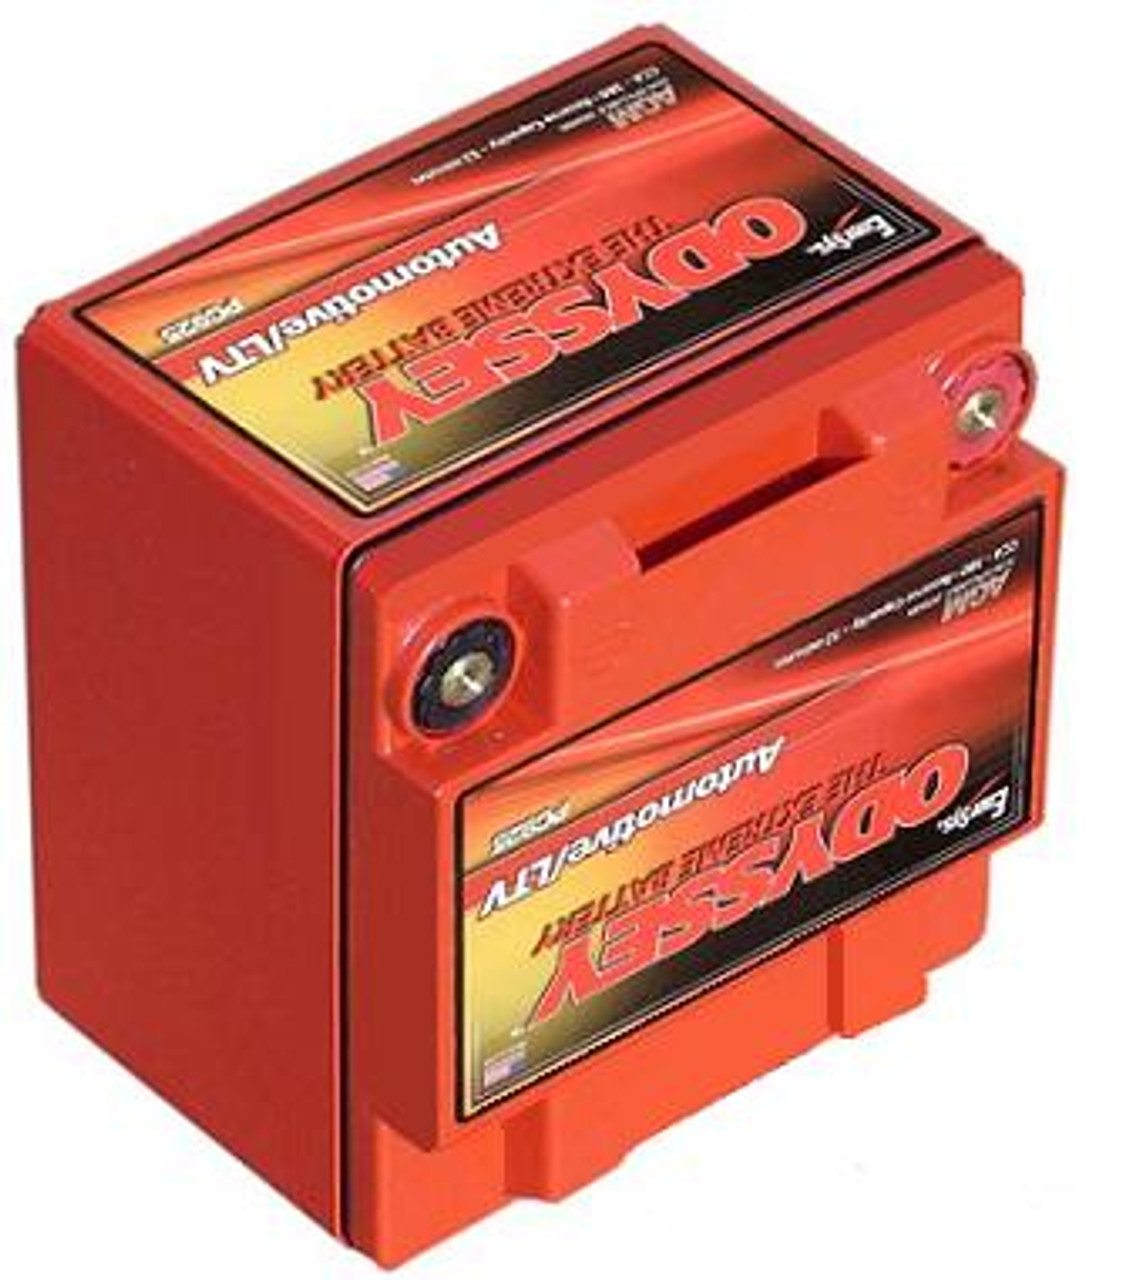 Odyssey Harley Davidson 66010 97a Replacement Battery By Odyssey